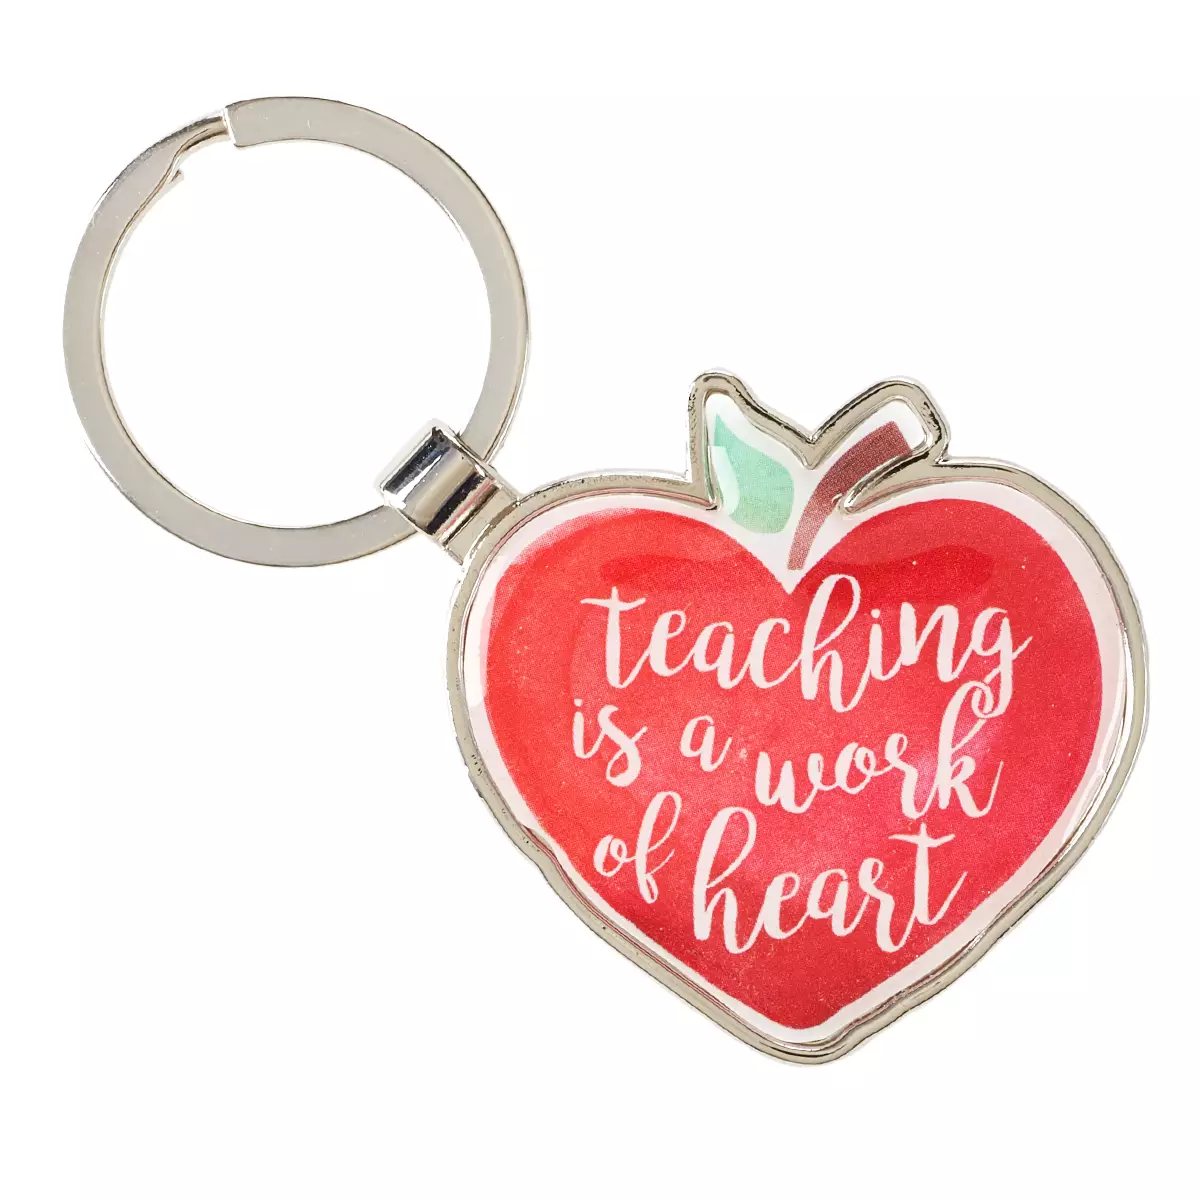 Teacher Appreciation Keychain w/Touching Message -"Teaching is a Work of the Heart" – Enameled Charm Bible Verse Colossians 3:23, Red Heart Shaped Apple Charm Key Ring